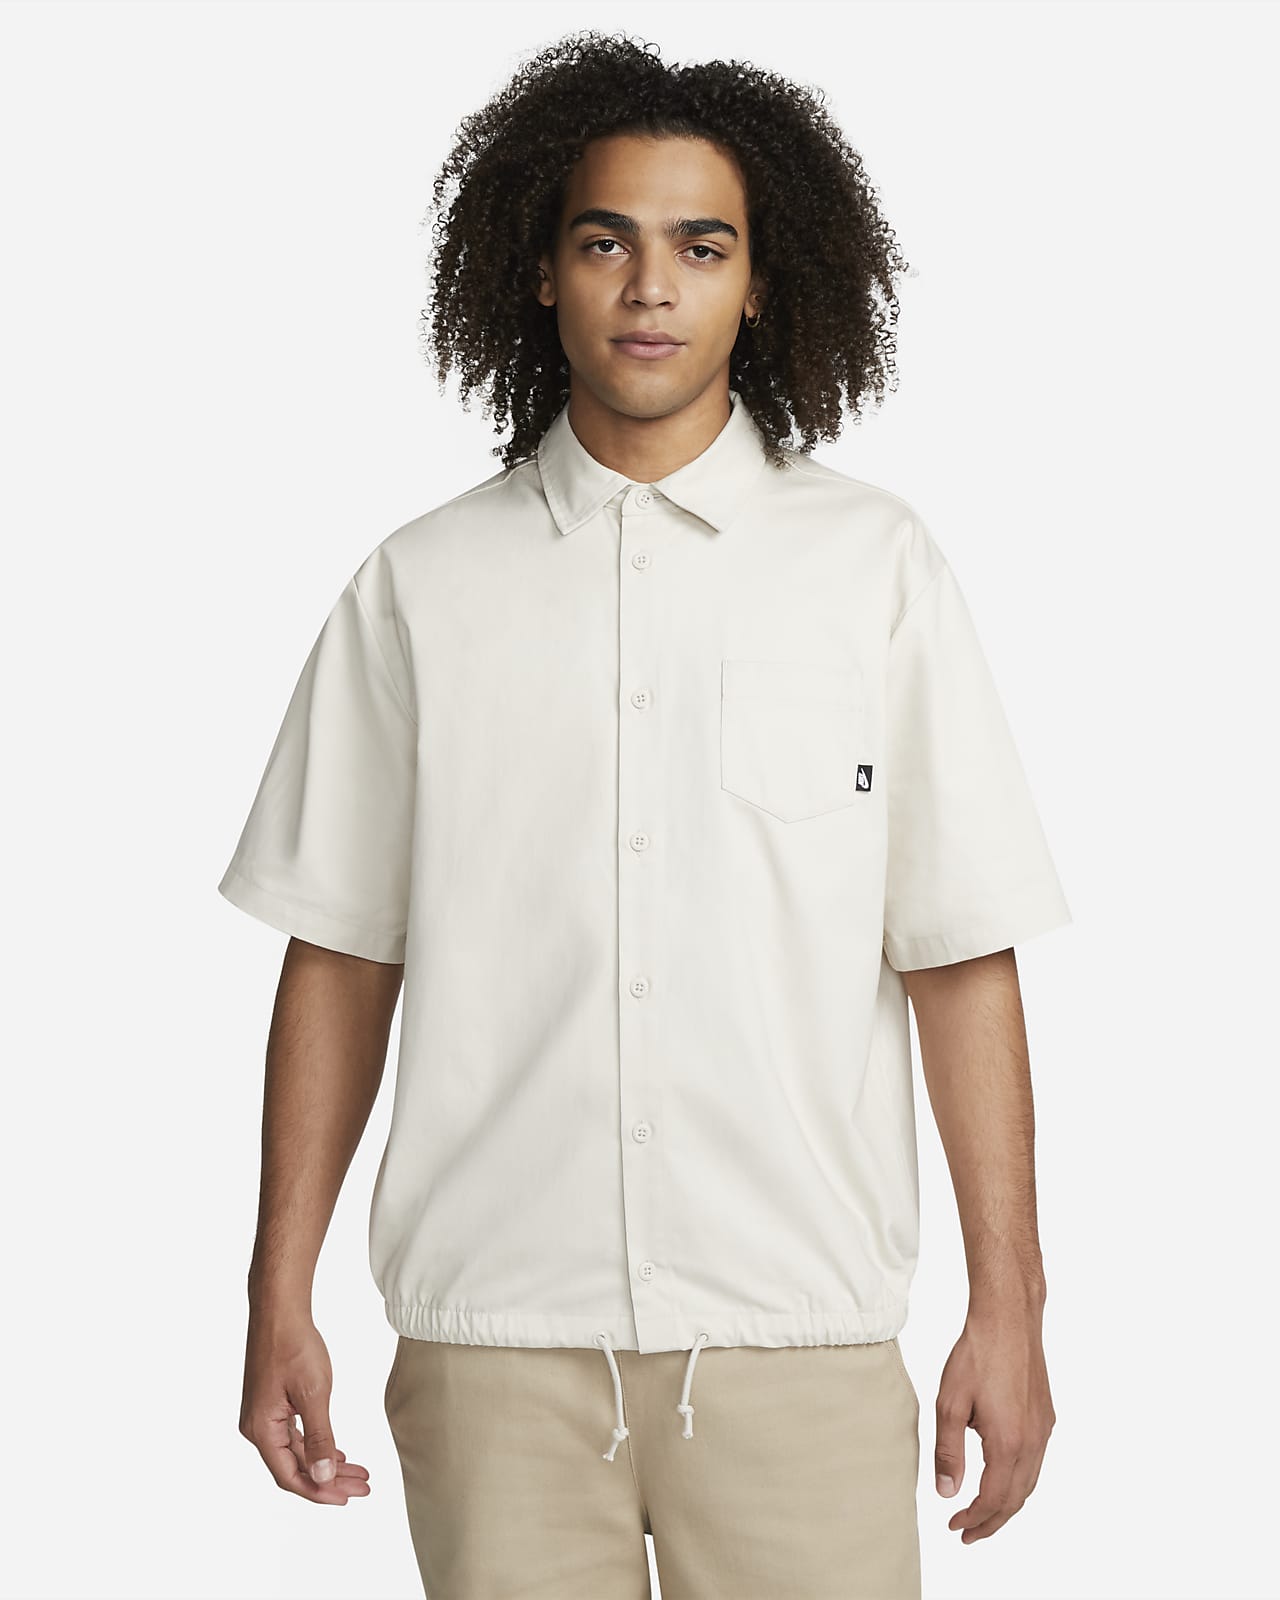 https://static.nike.com/a/images/t_PDP_1280_v1/f_auto,q_auto:eco/af95140f-04d5-4a26-84d9-b6ddbf7919f7/club-button-down-short-sleeve-top-7fFt5R.png